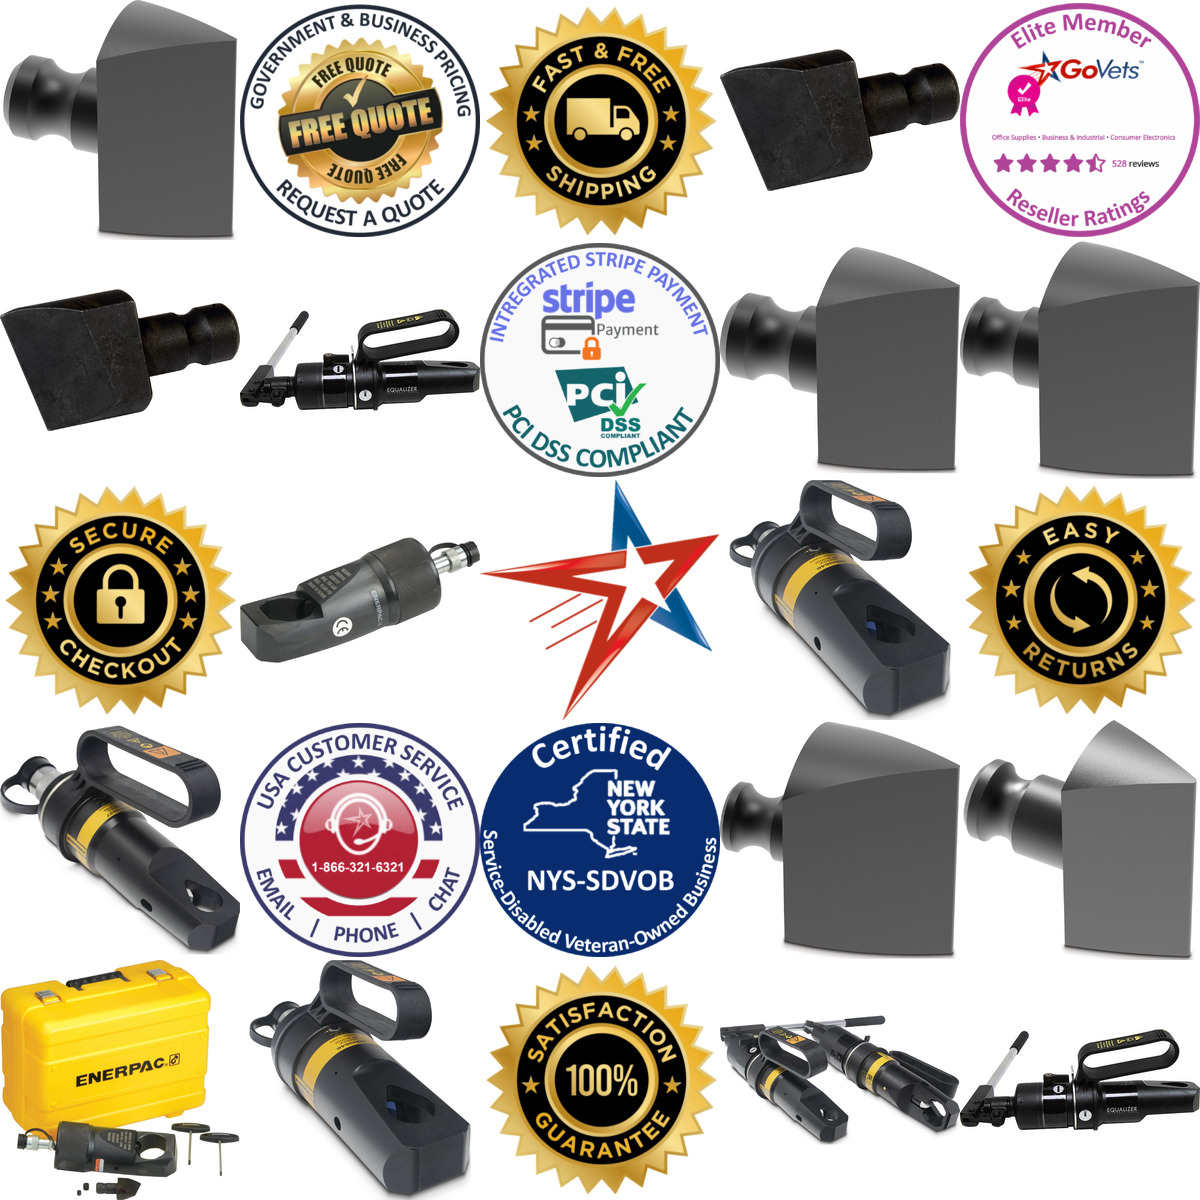 A selection of Power Nut Splitters products on GoVets